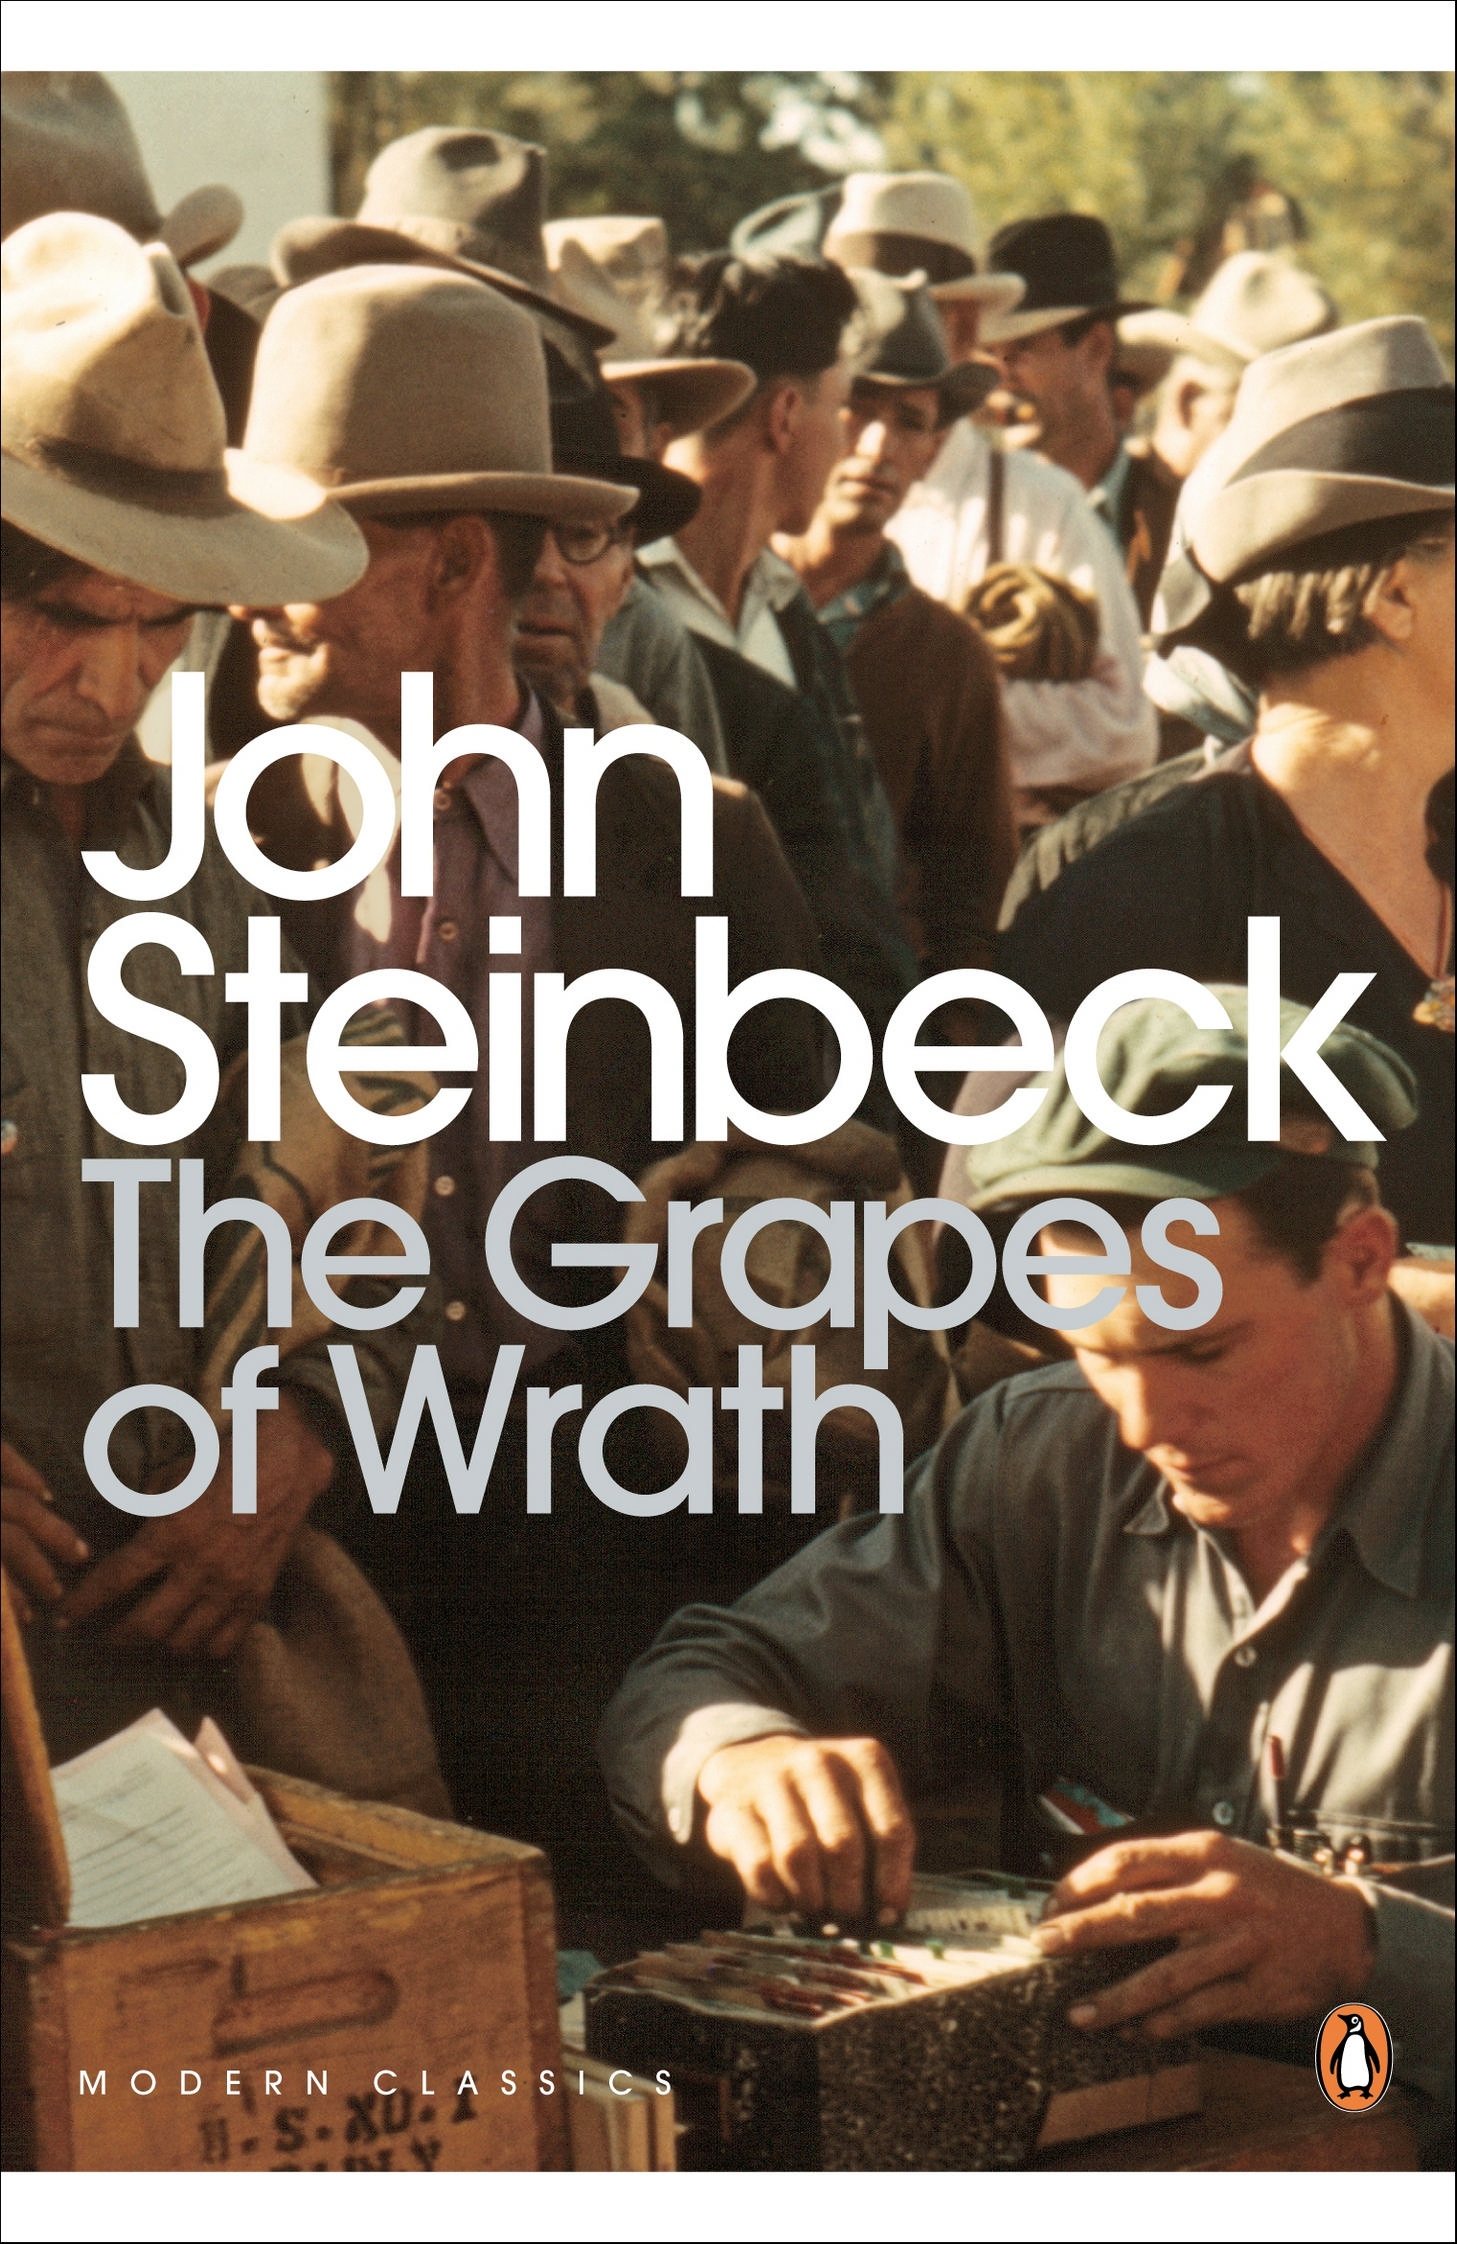 The Grapes of Wrath, by John Steinbeck - book to read